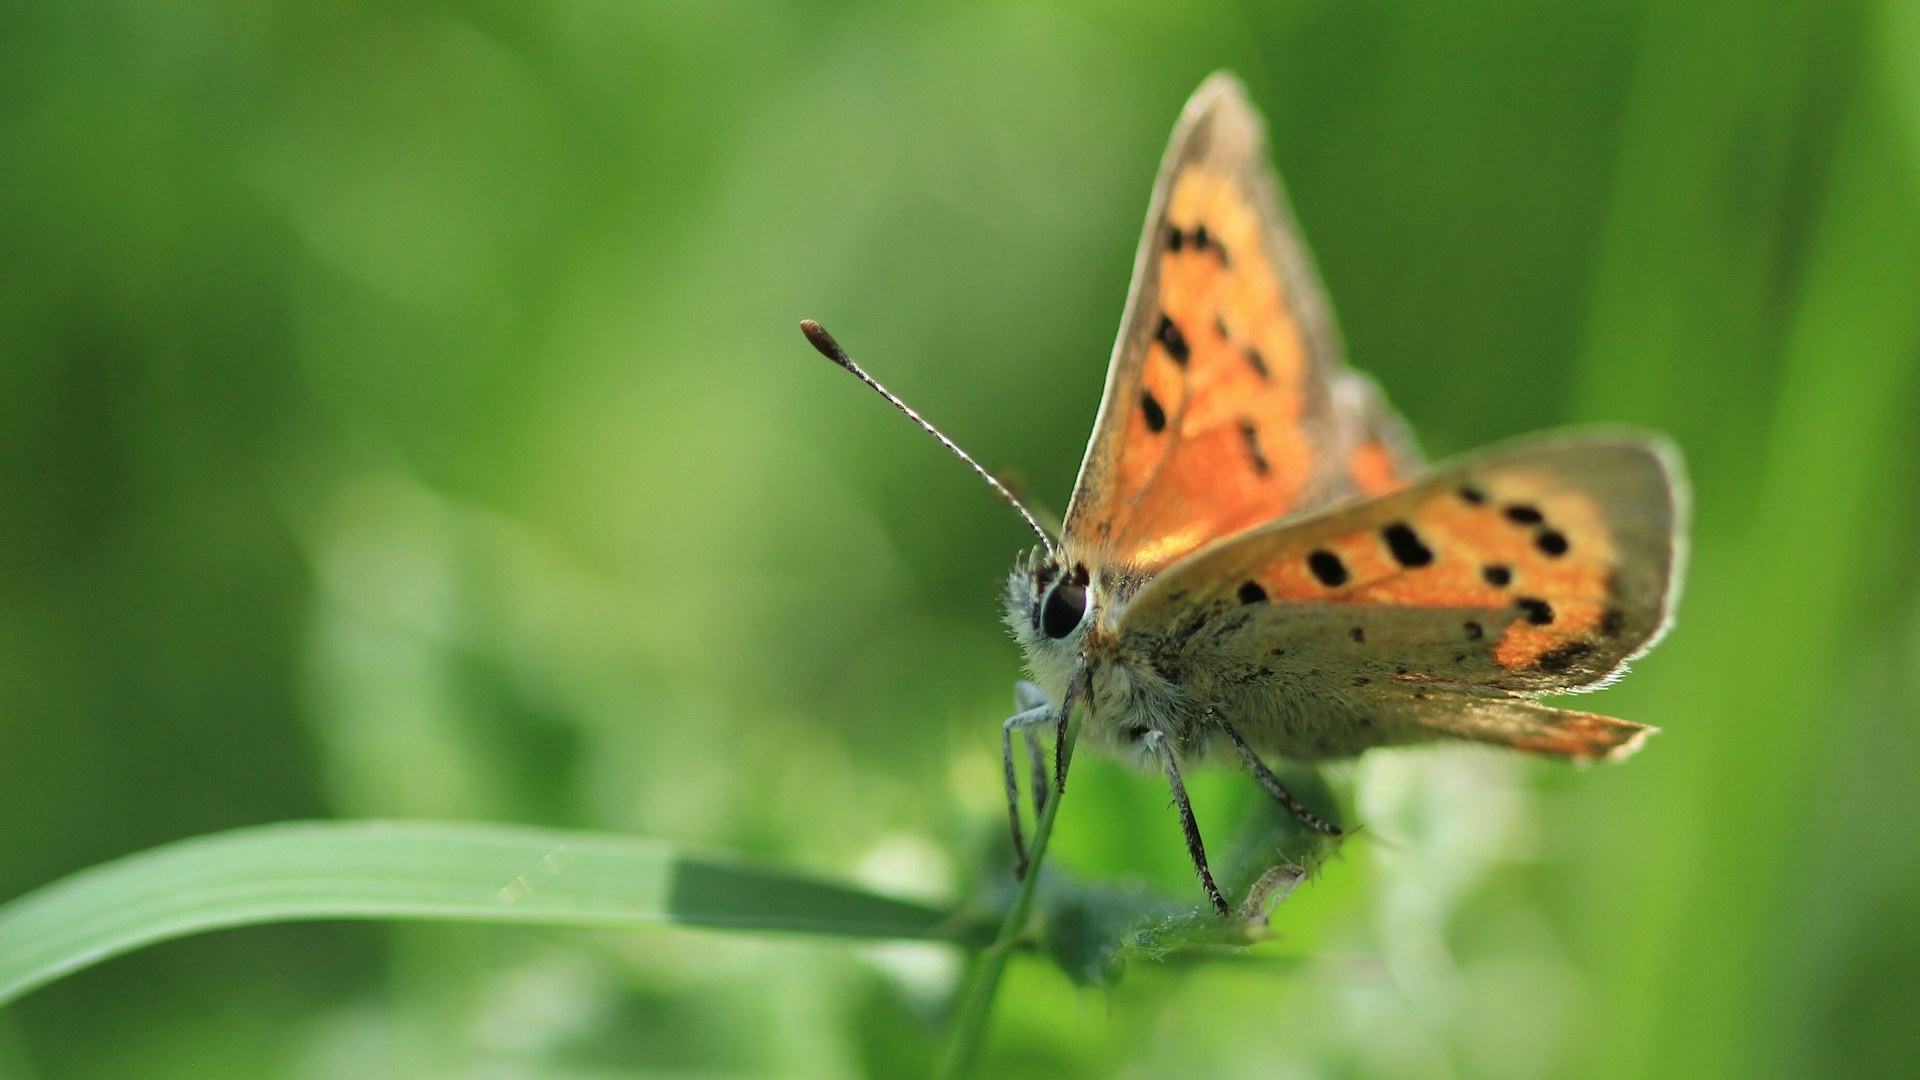 Small copper butterfly perched on grass blade at Wilder Little Duxmore rewilding project, Isle of Wight